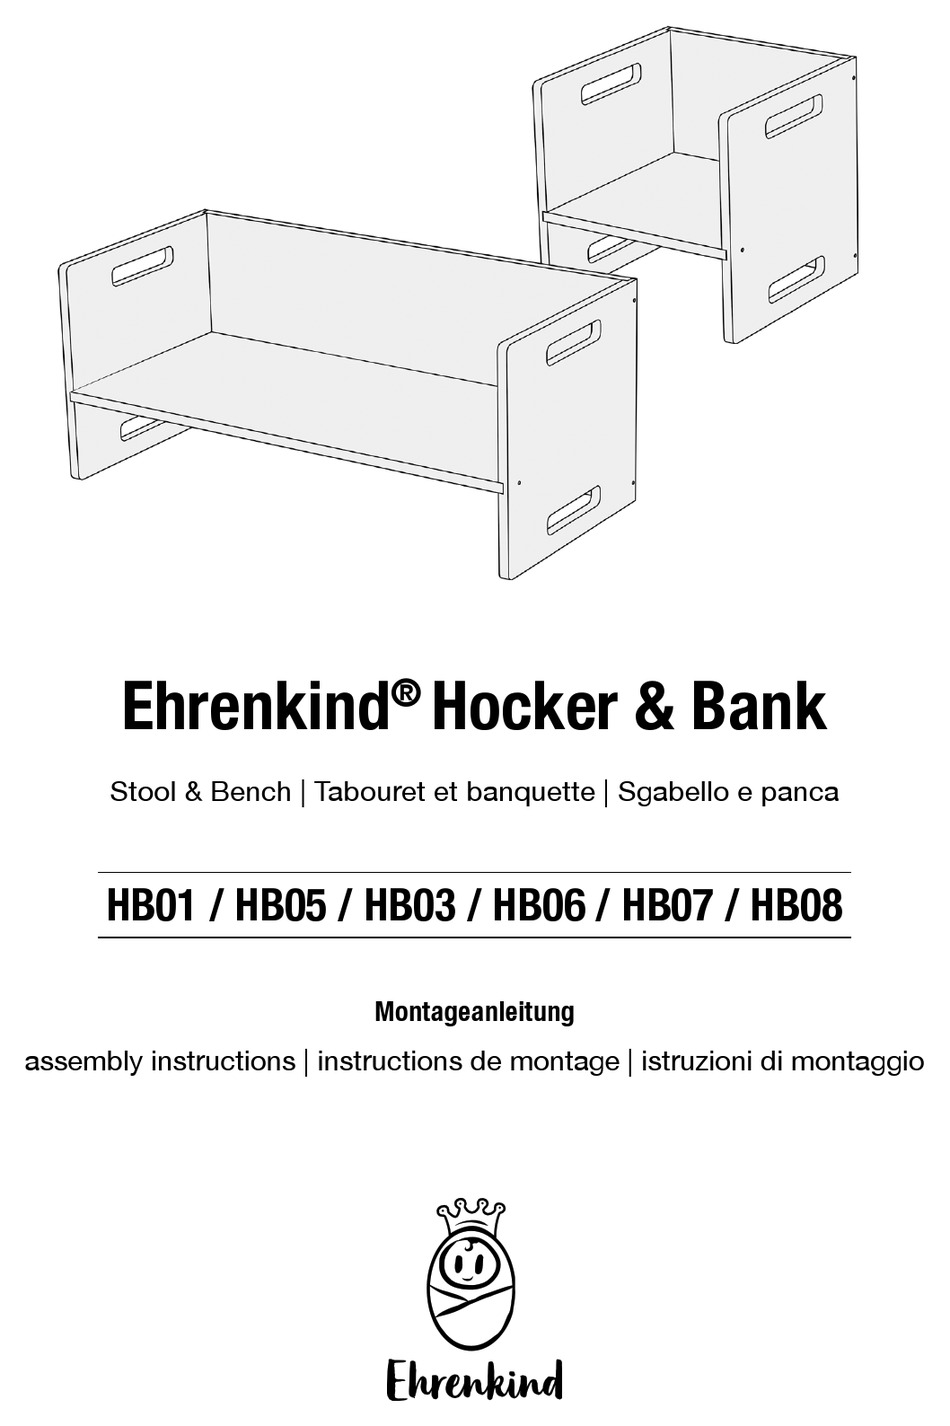 EHRENKIND HB05 ASSEMBLY INSTRUCTIONS MANUAL Pdf Download